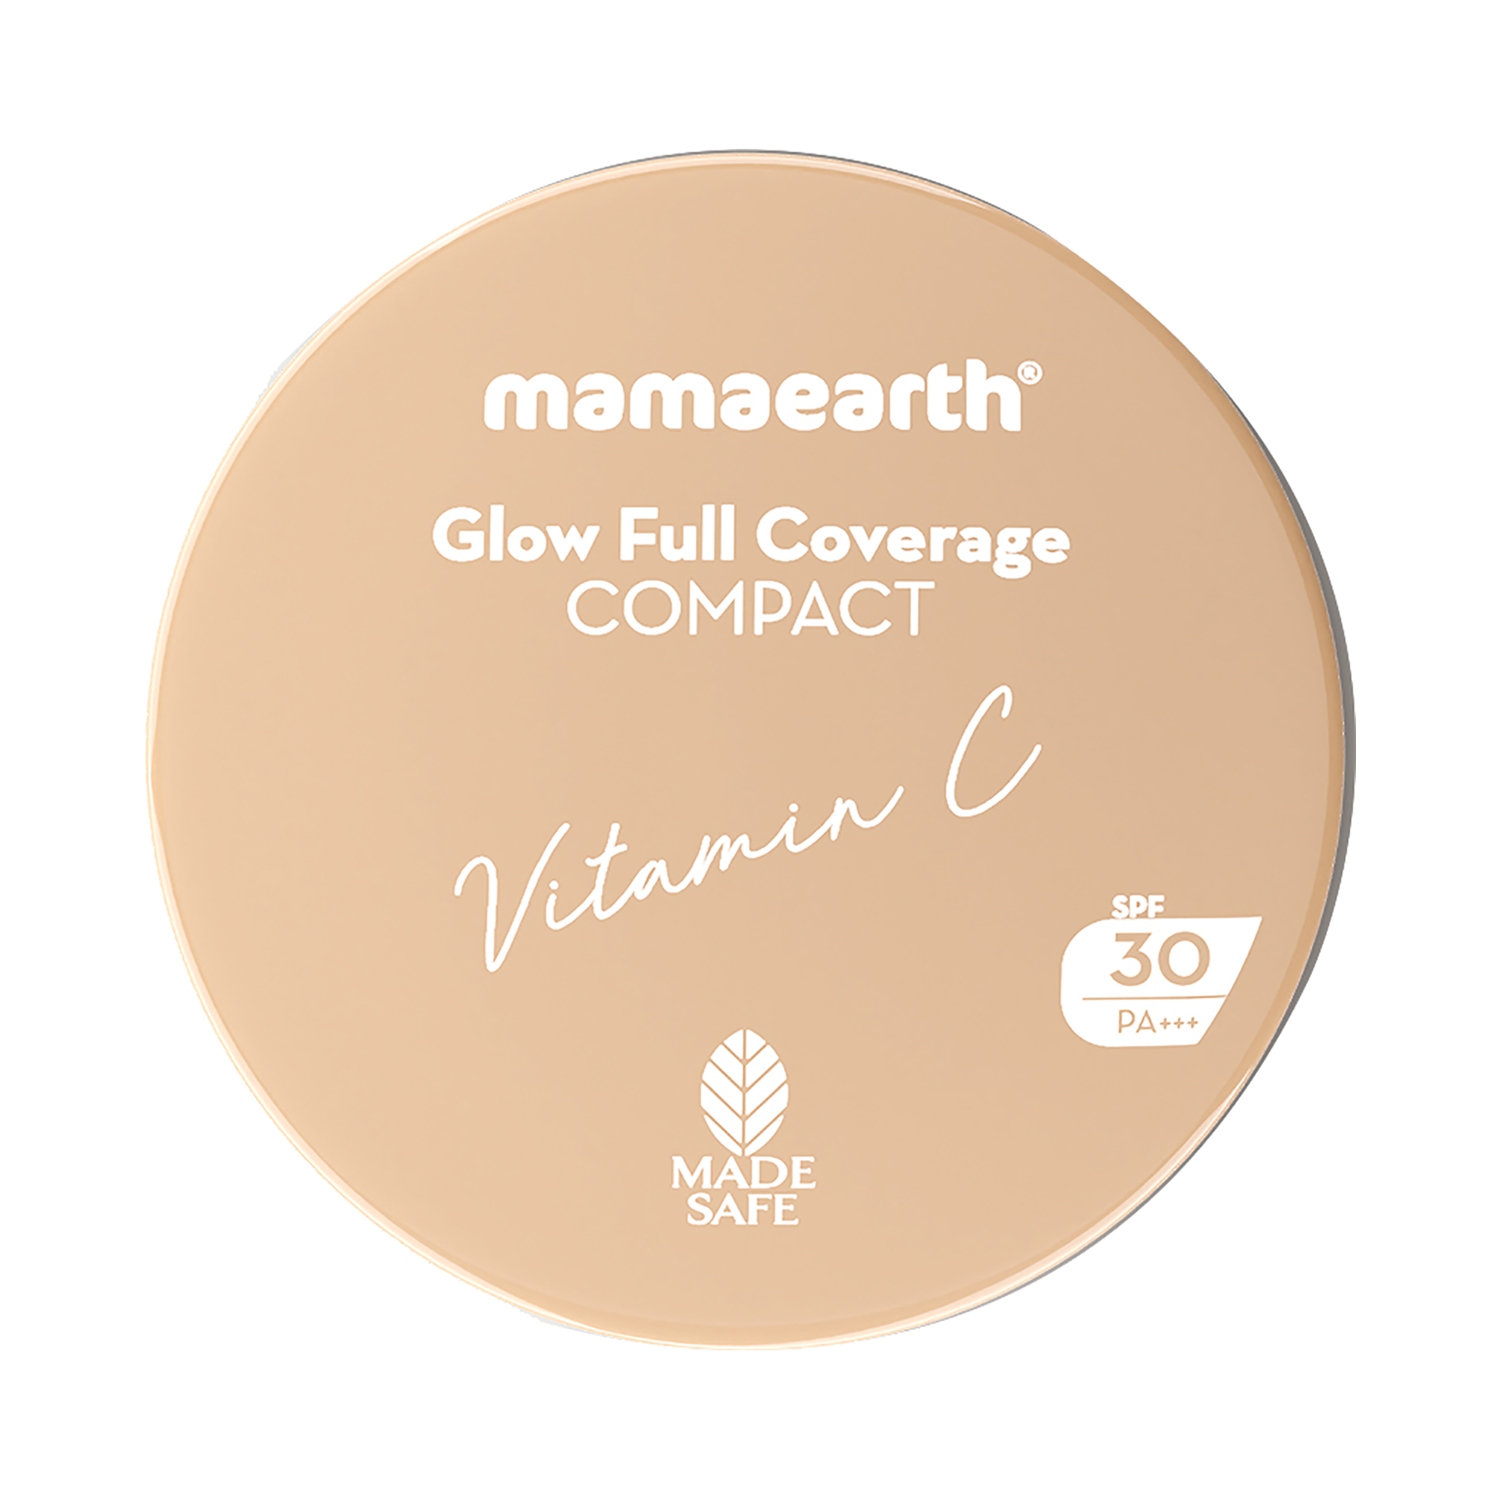 Mamaearth Glow Full Coverage Compact SPF 30 PA+++ With Vitamin C - 02 Ivory Glow (9g)